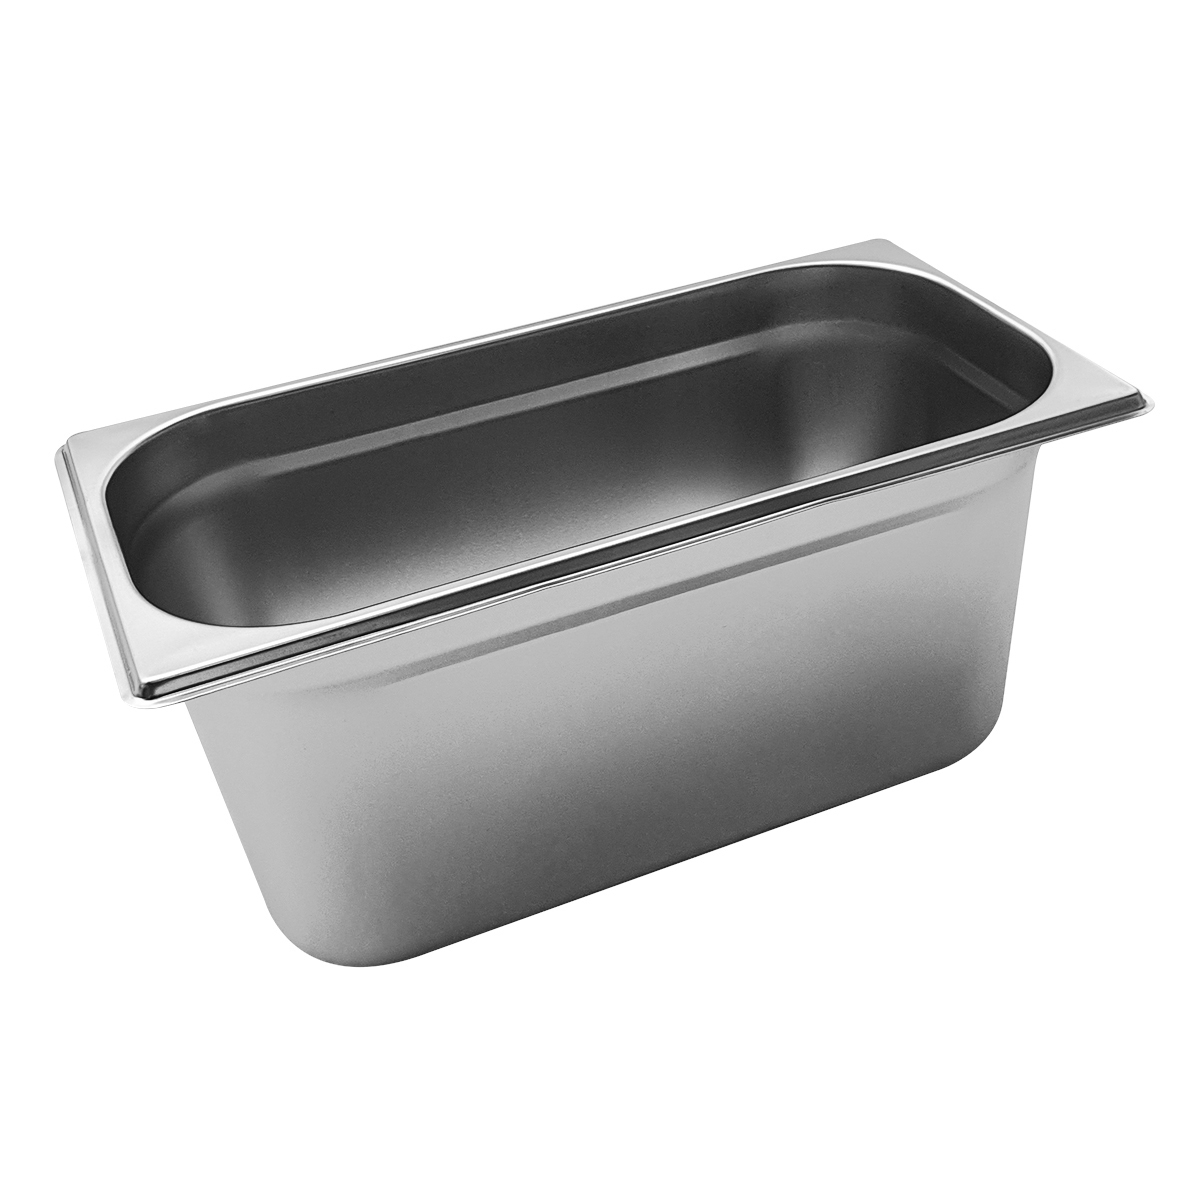 Cater-Cook 1/3 Stainless Steel Gastronorm Container 150mm Deep - CK4021